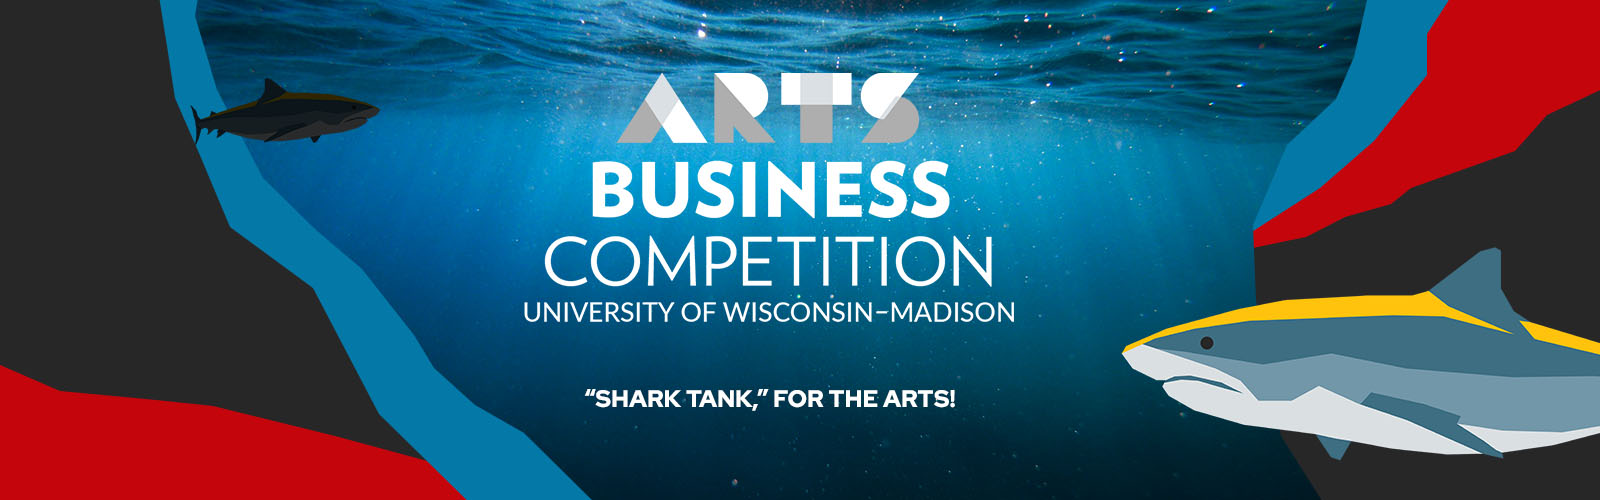 Arts Business Competition graphic